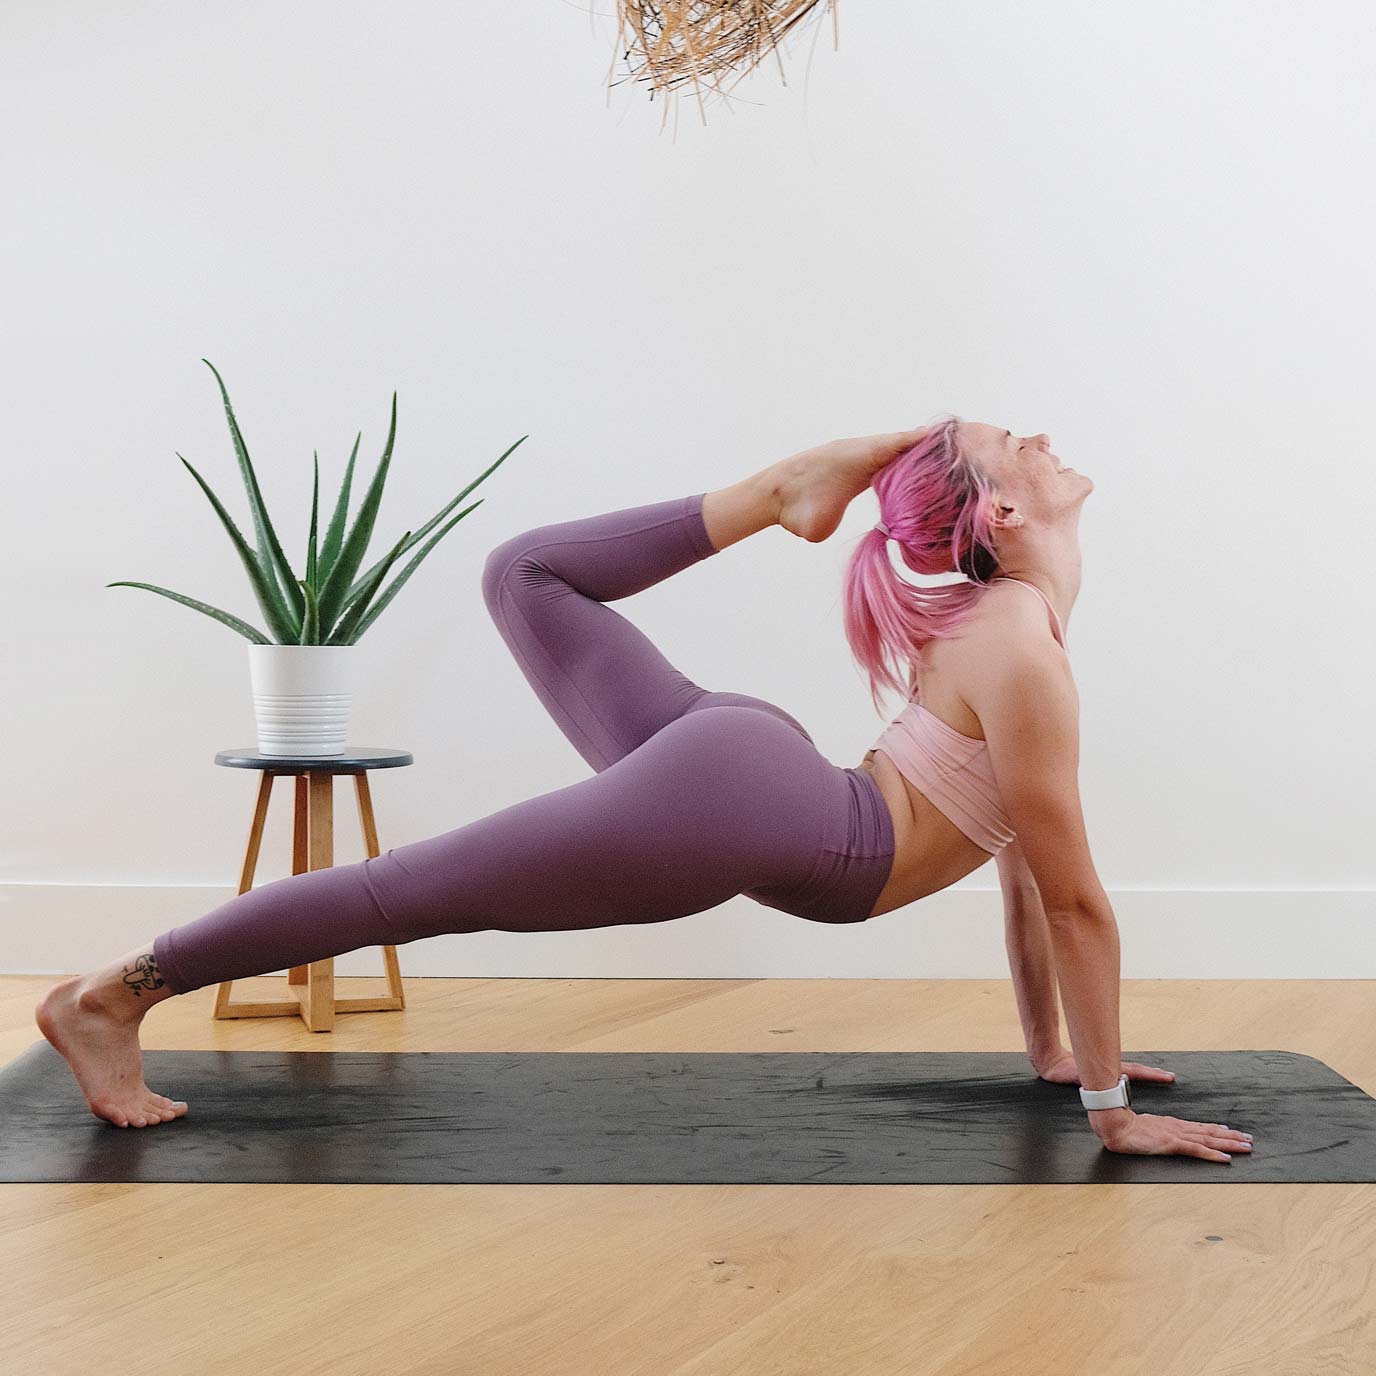 Read about whether yoga is good for our pelvic floor muscles